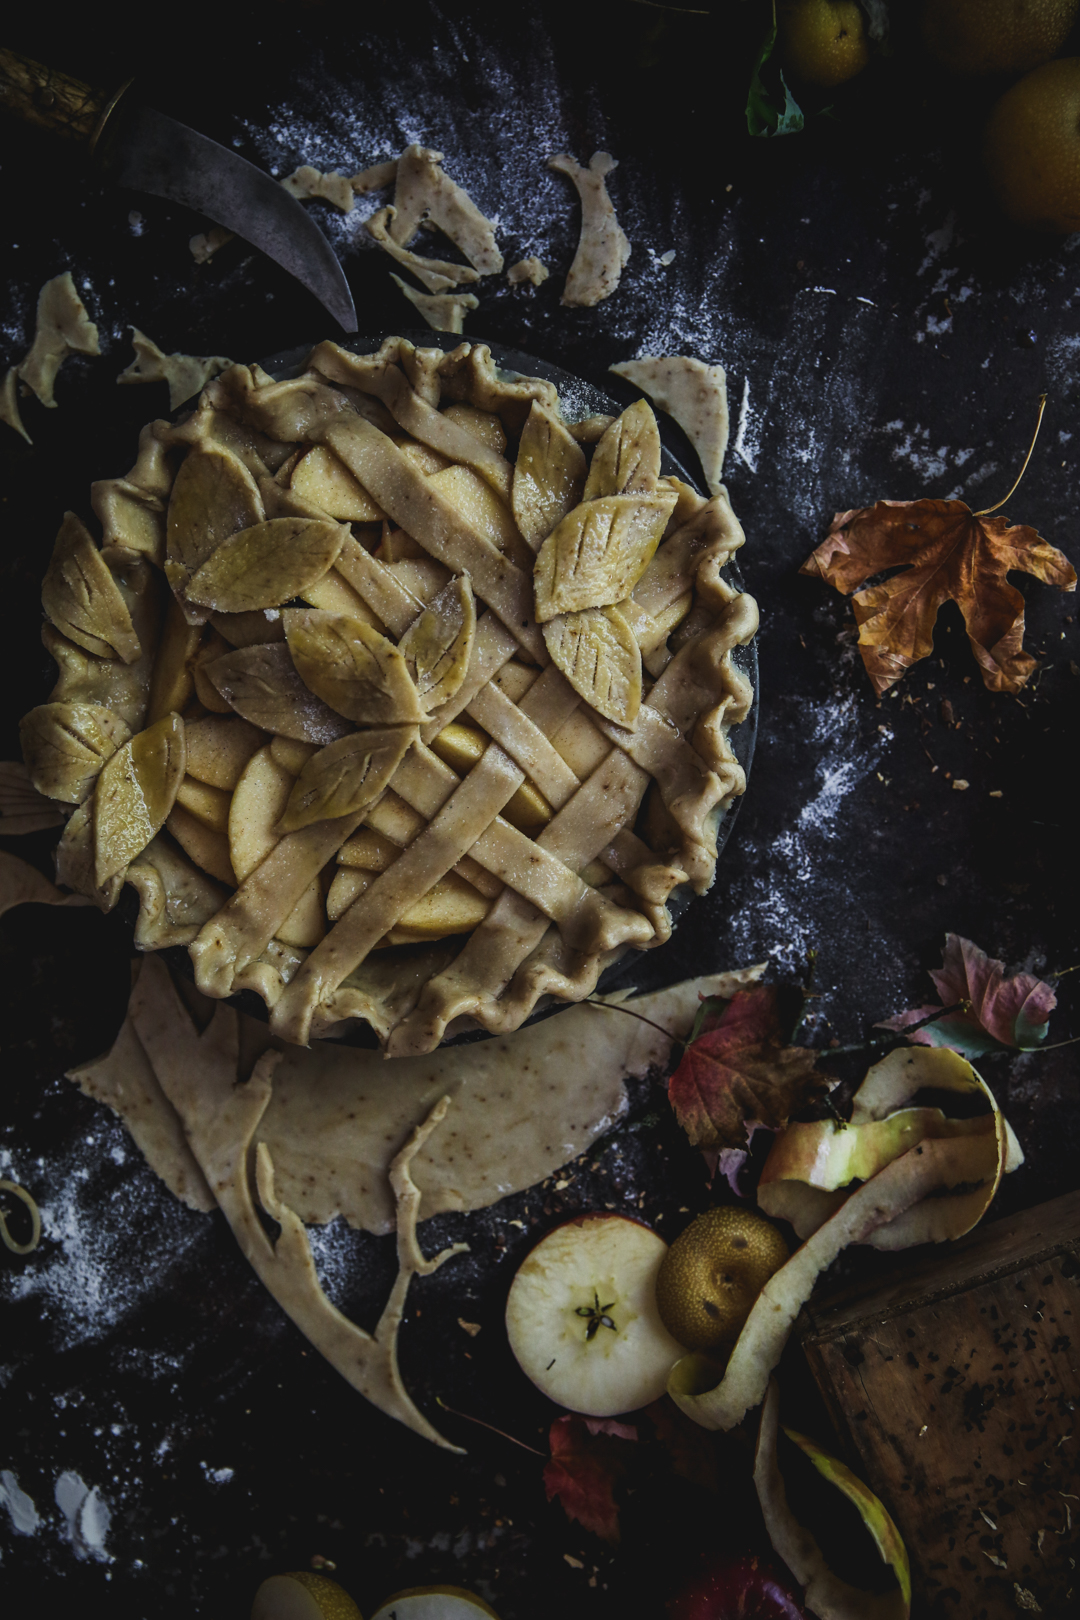 apple-bourbon-pie-photography-recipe-and-styling-by-christiann-koepke-of-christiannkoepke-com-10